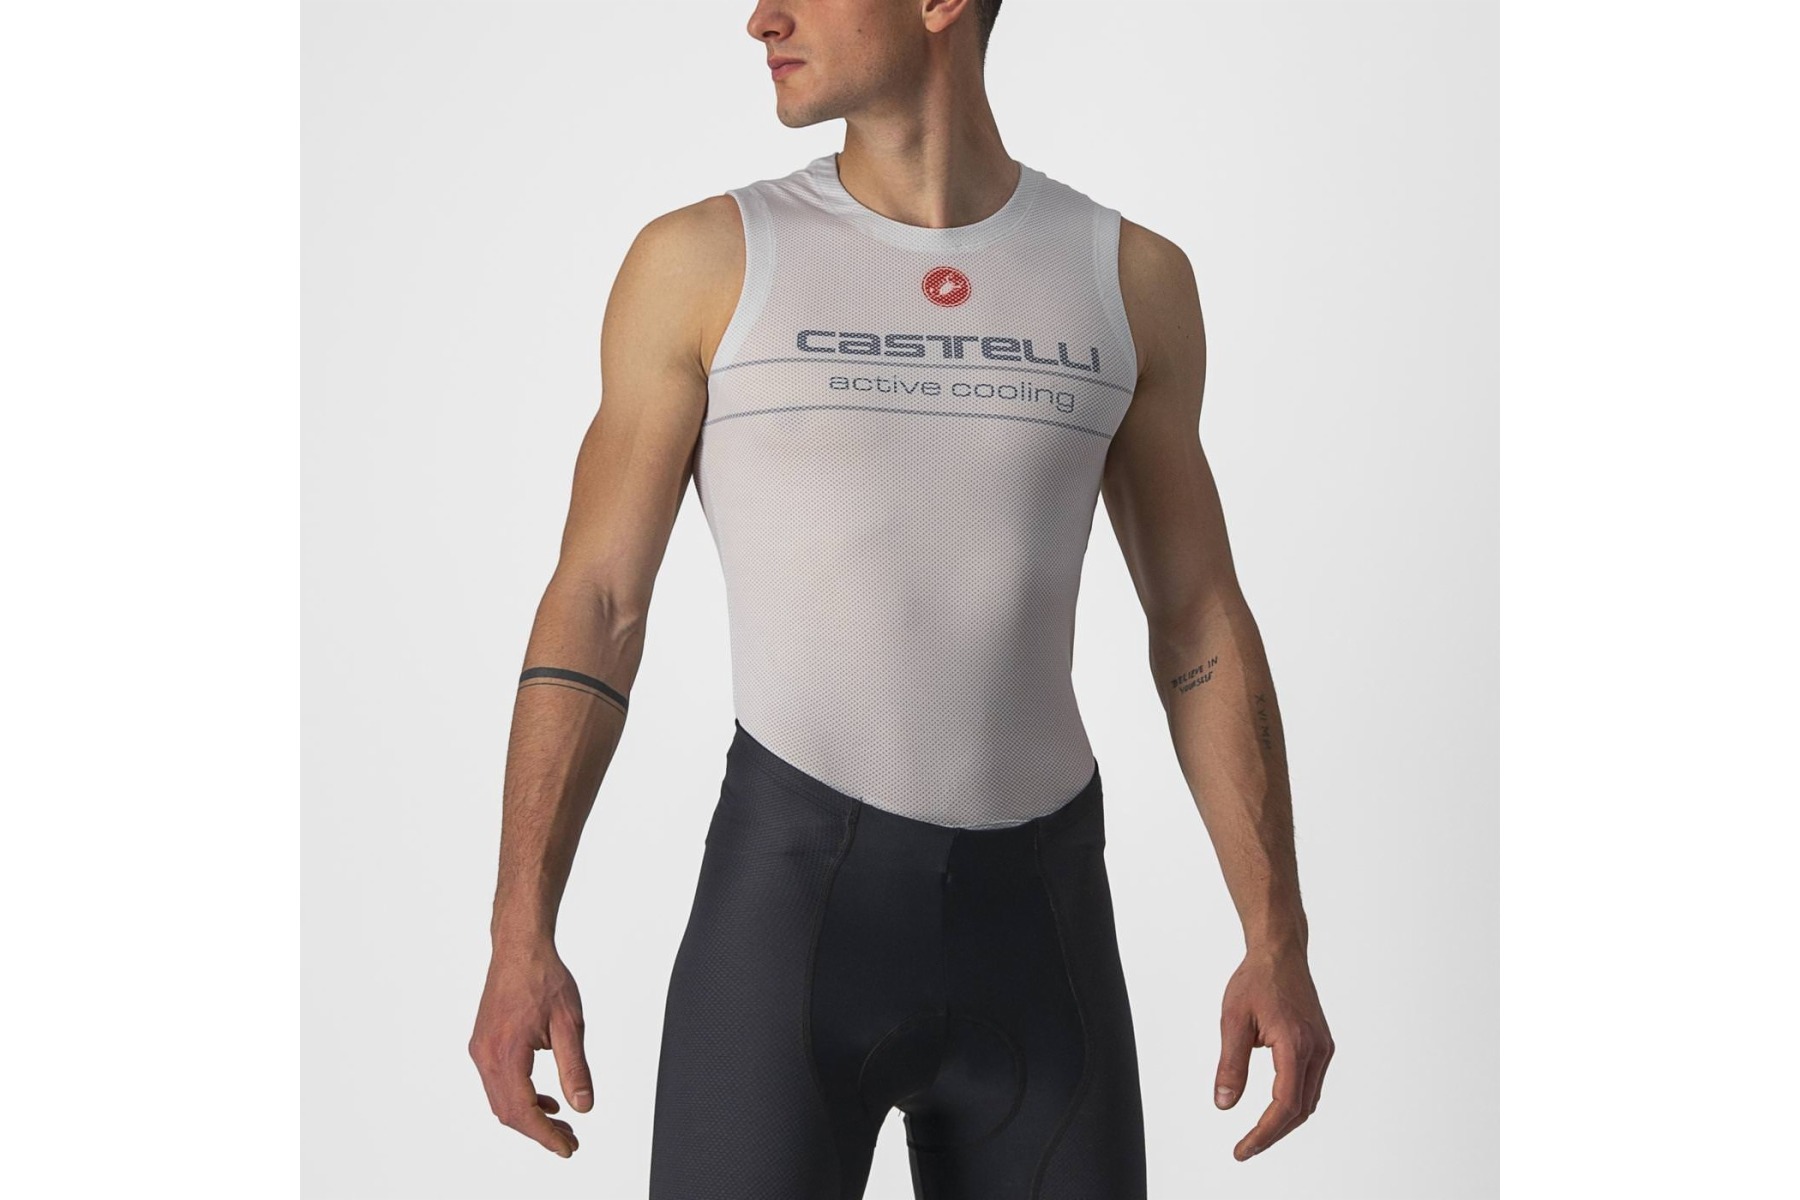 Castelli Active Cooling Sleeveless Top